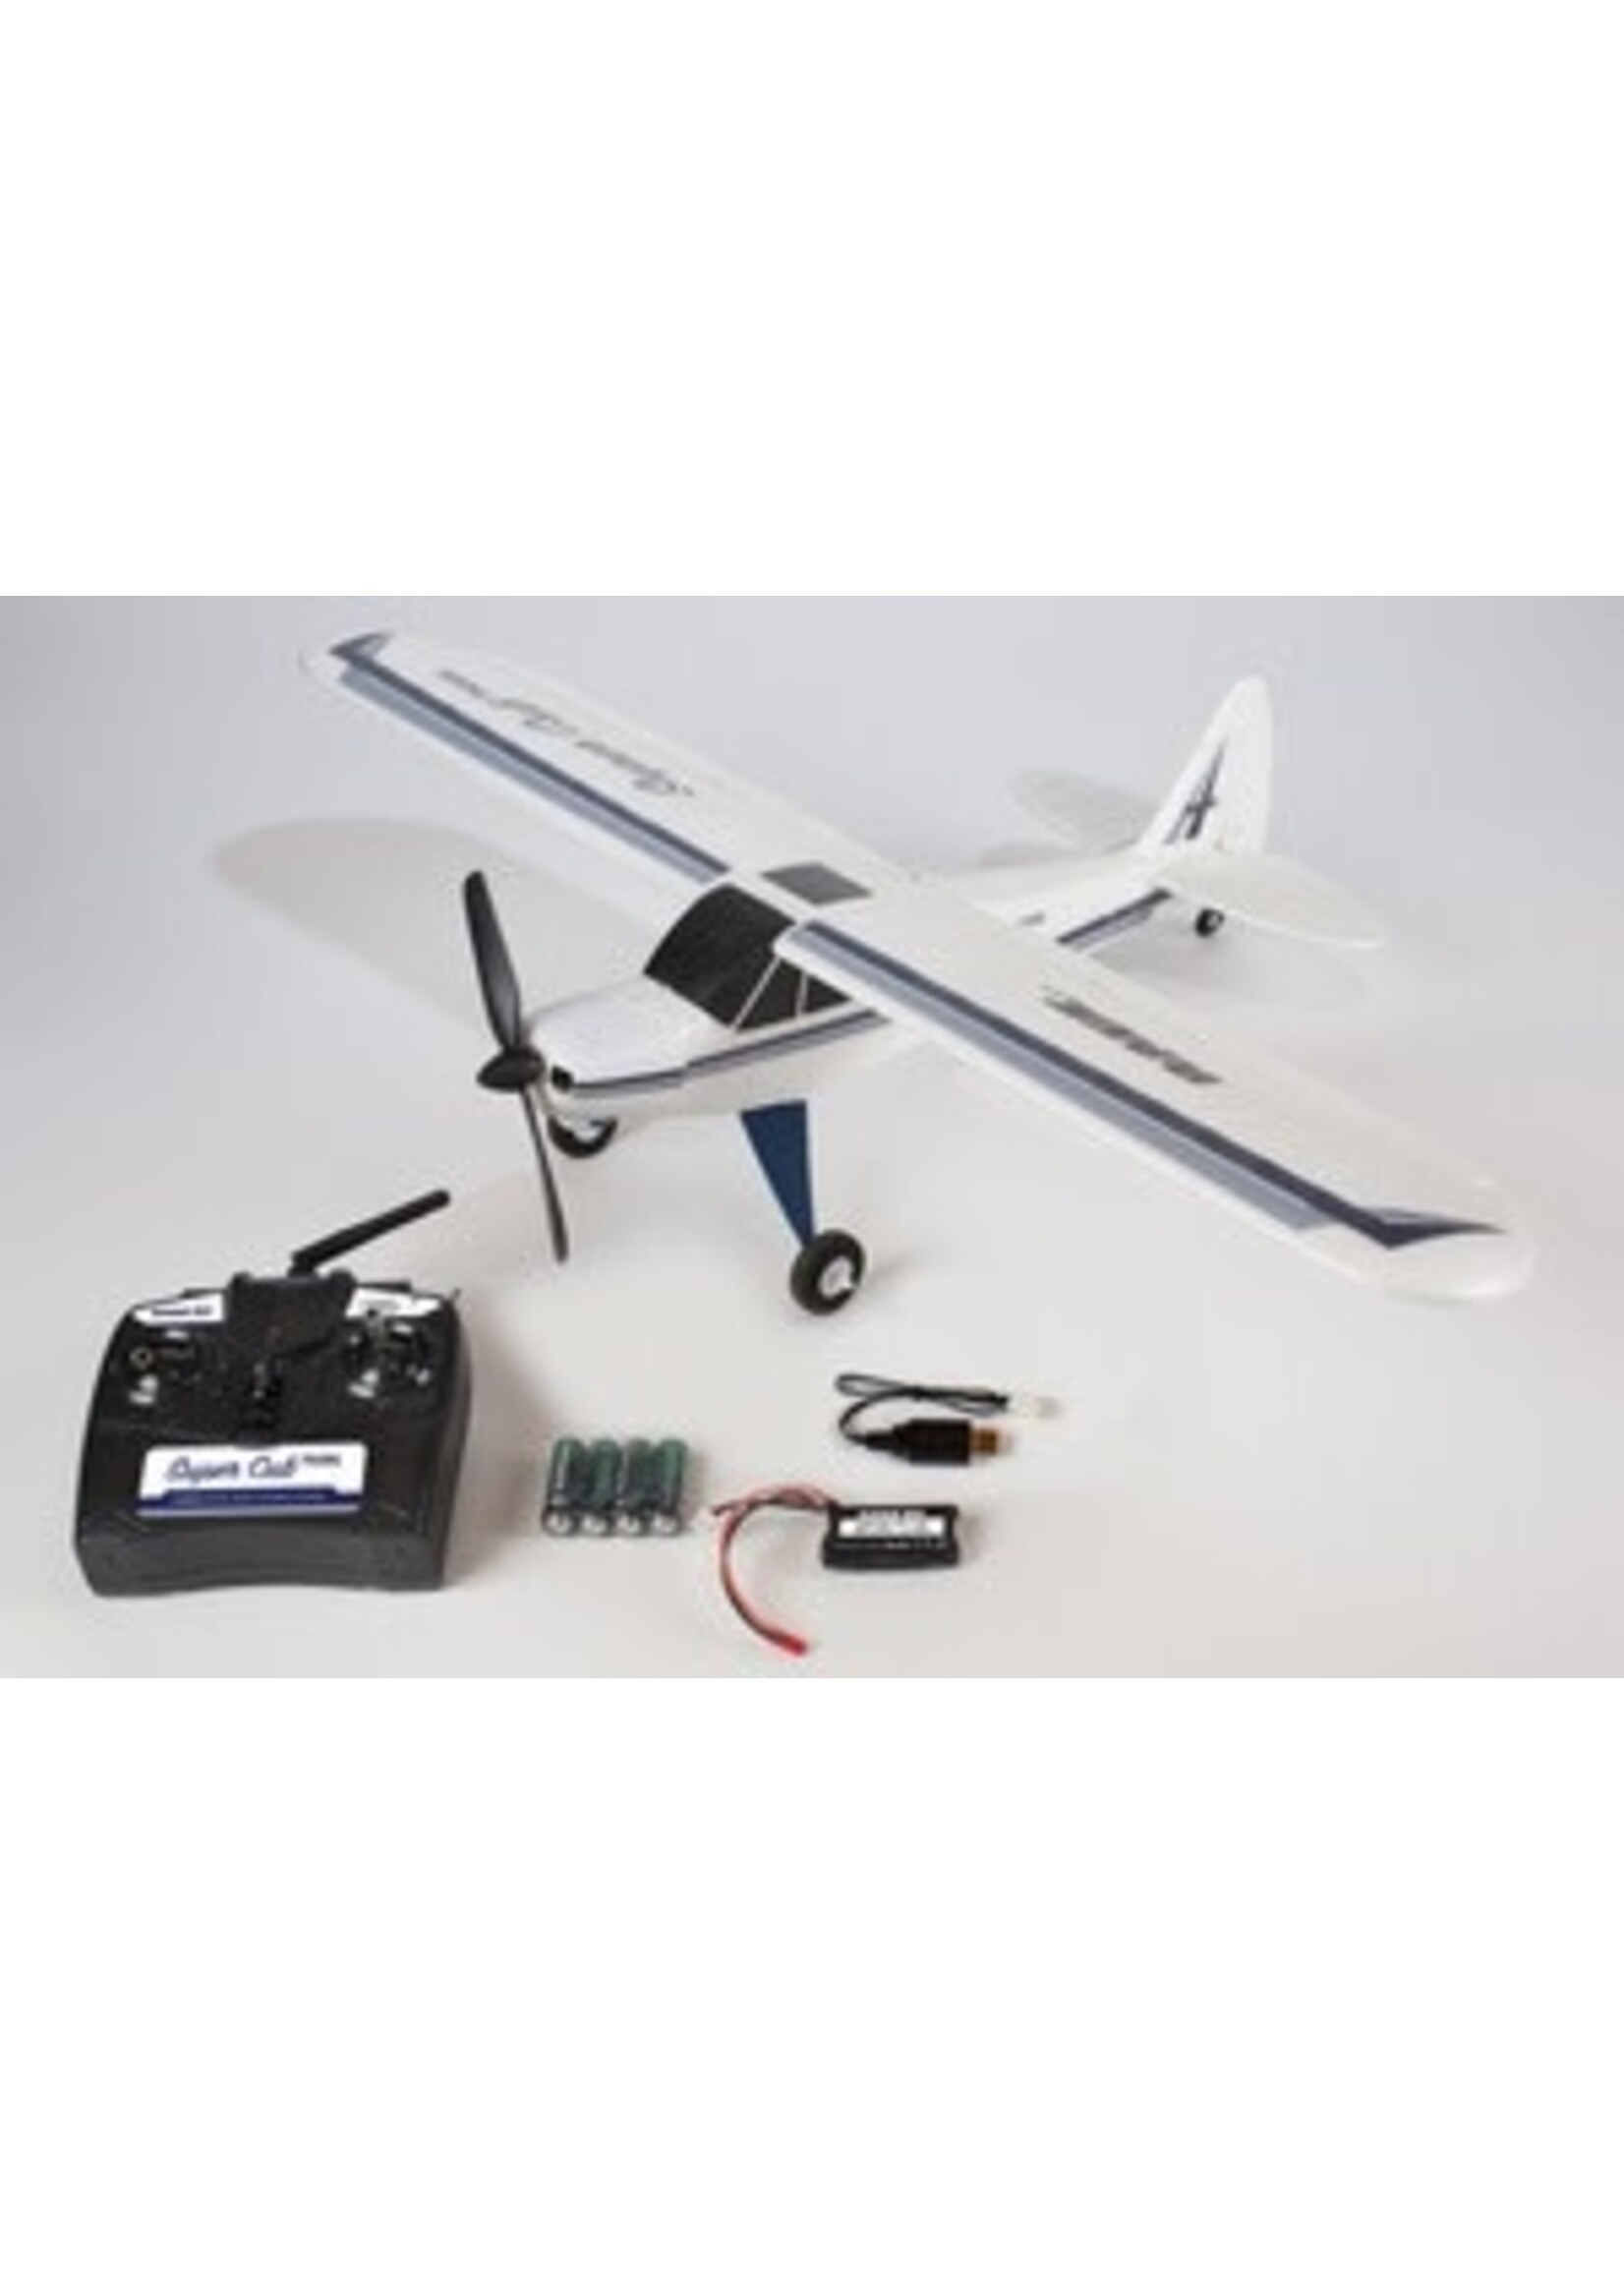 Rage rc RGRA1500 Super Cub 750 Brushless RTF 4-Channel Aircraft with PASS System